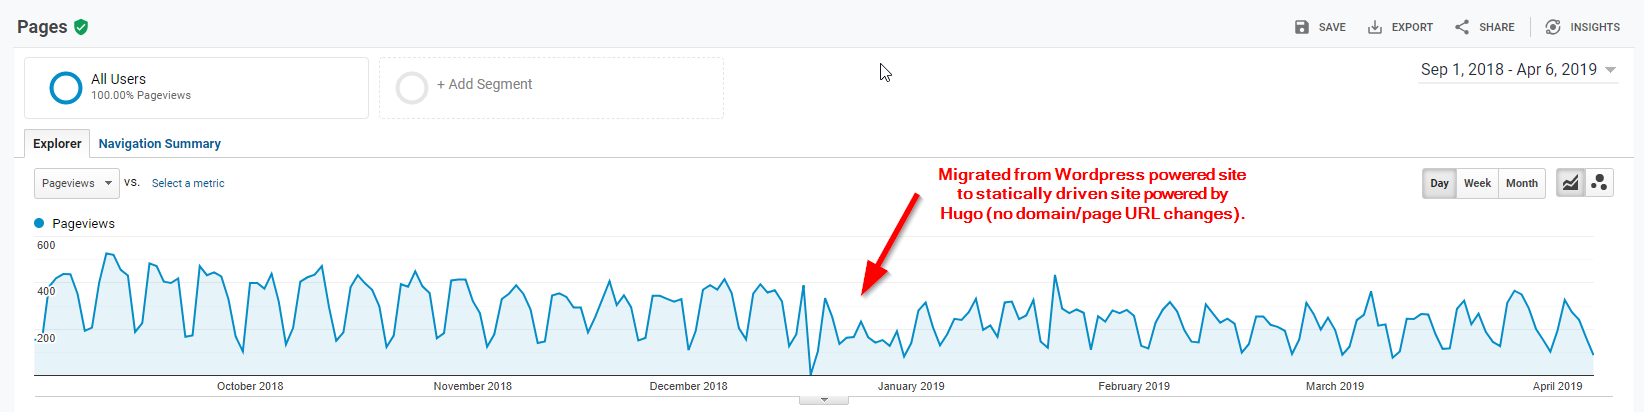 The decrease in page views after the migration from a Wordpress powered site to a statically-generated site powered by Hugo. There were no domain/page URL changes during this migration.